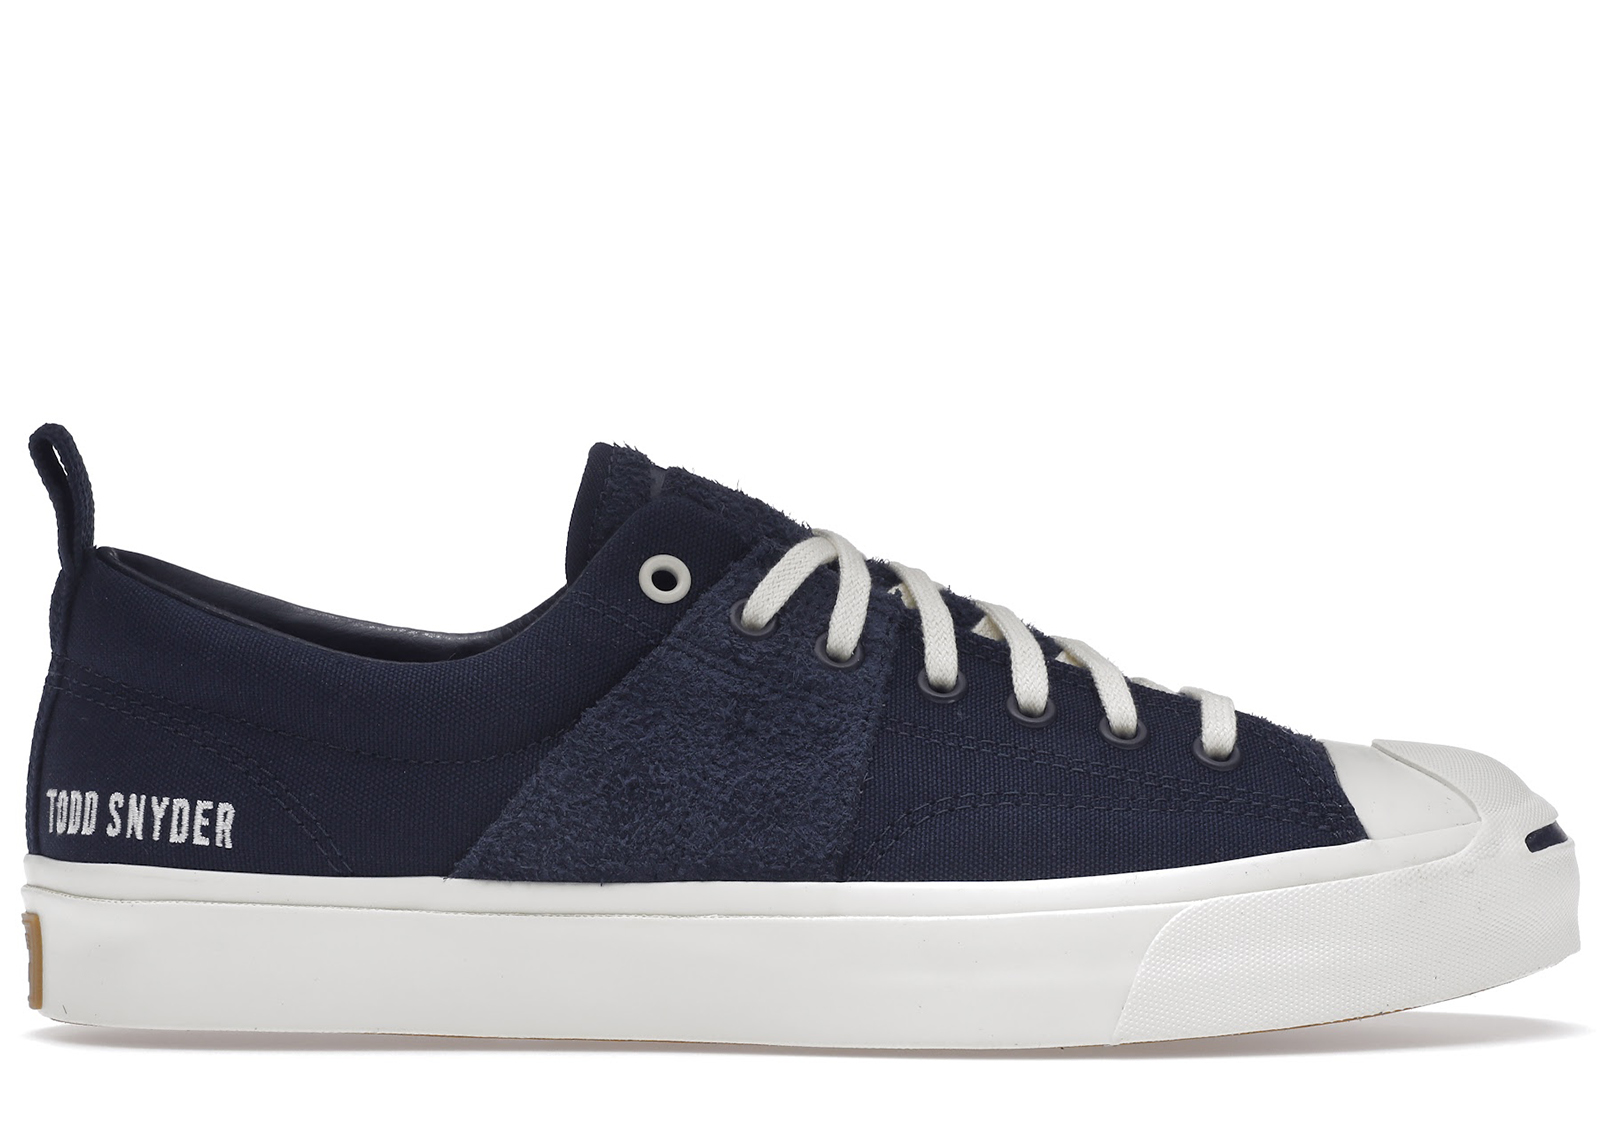 Converse Jack Purcell Todd Snyder Navy - 171844C - US